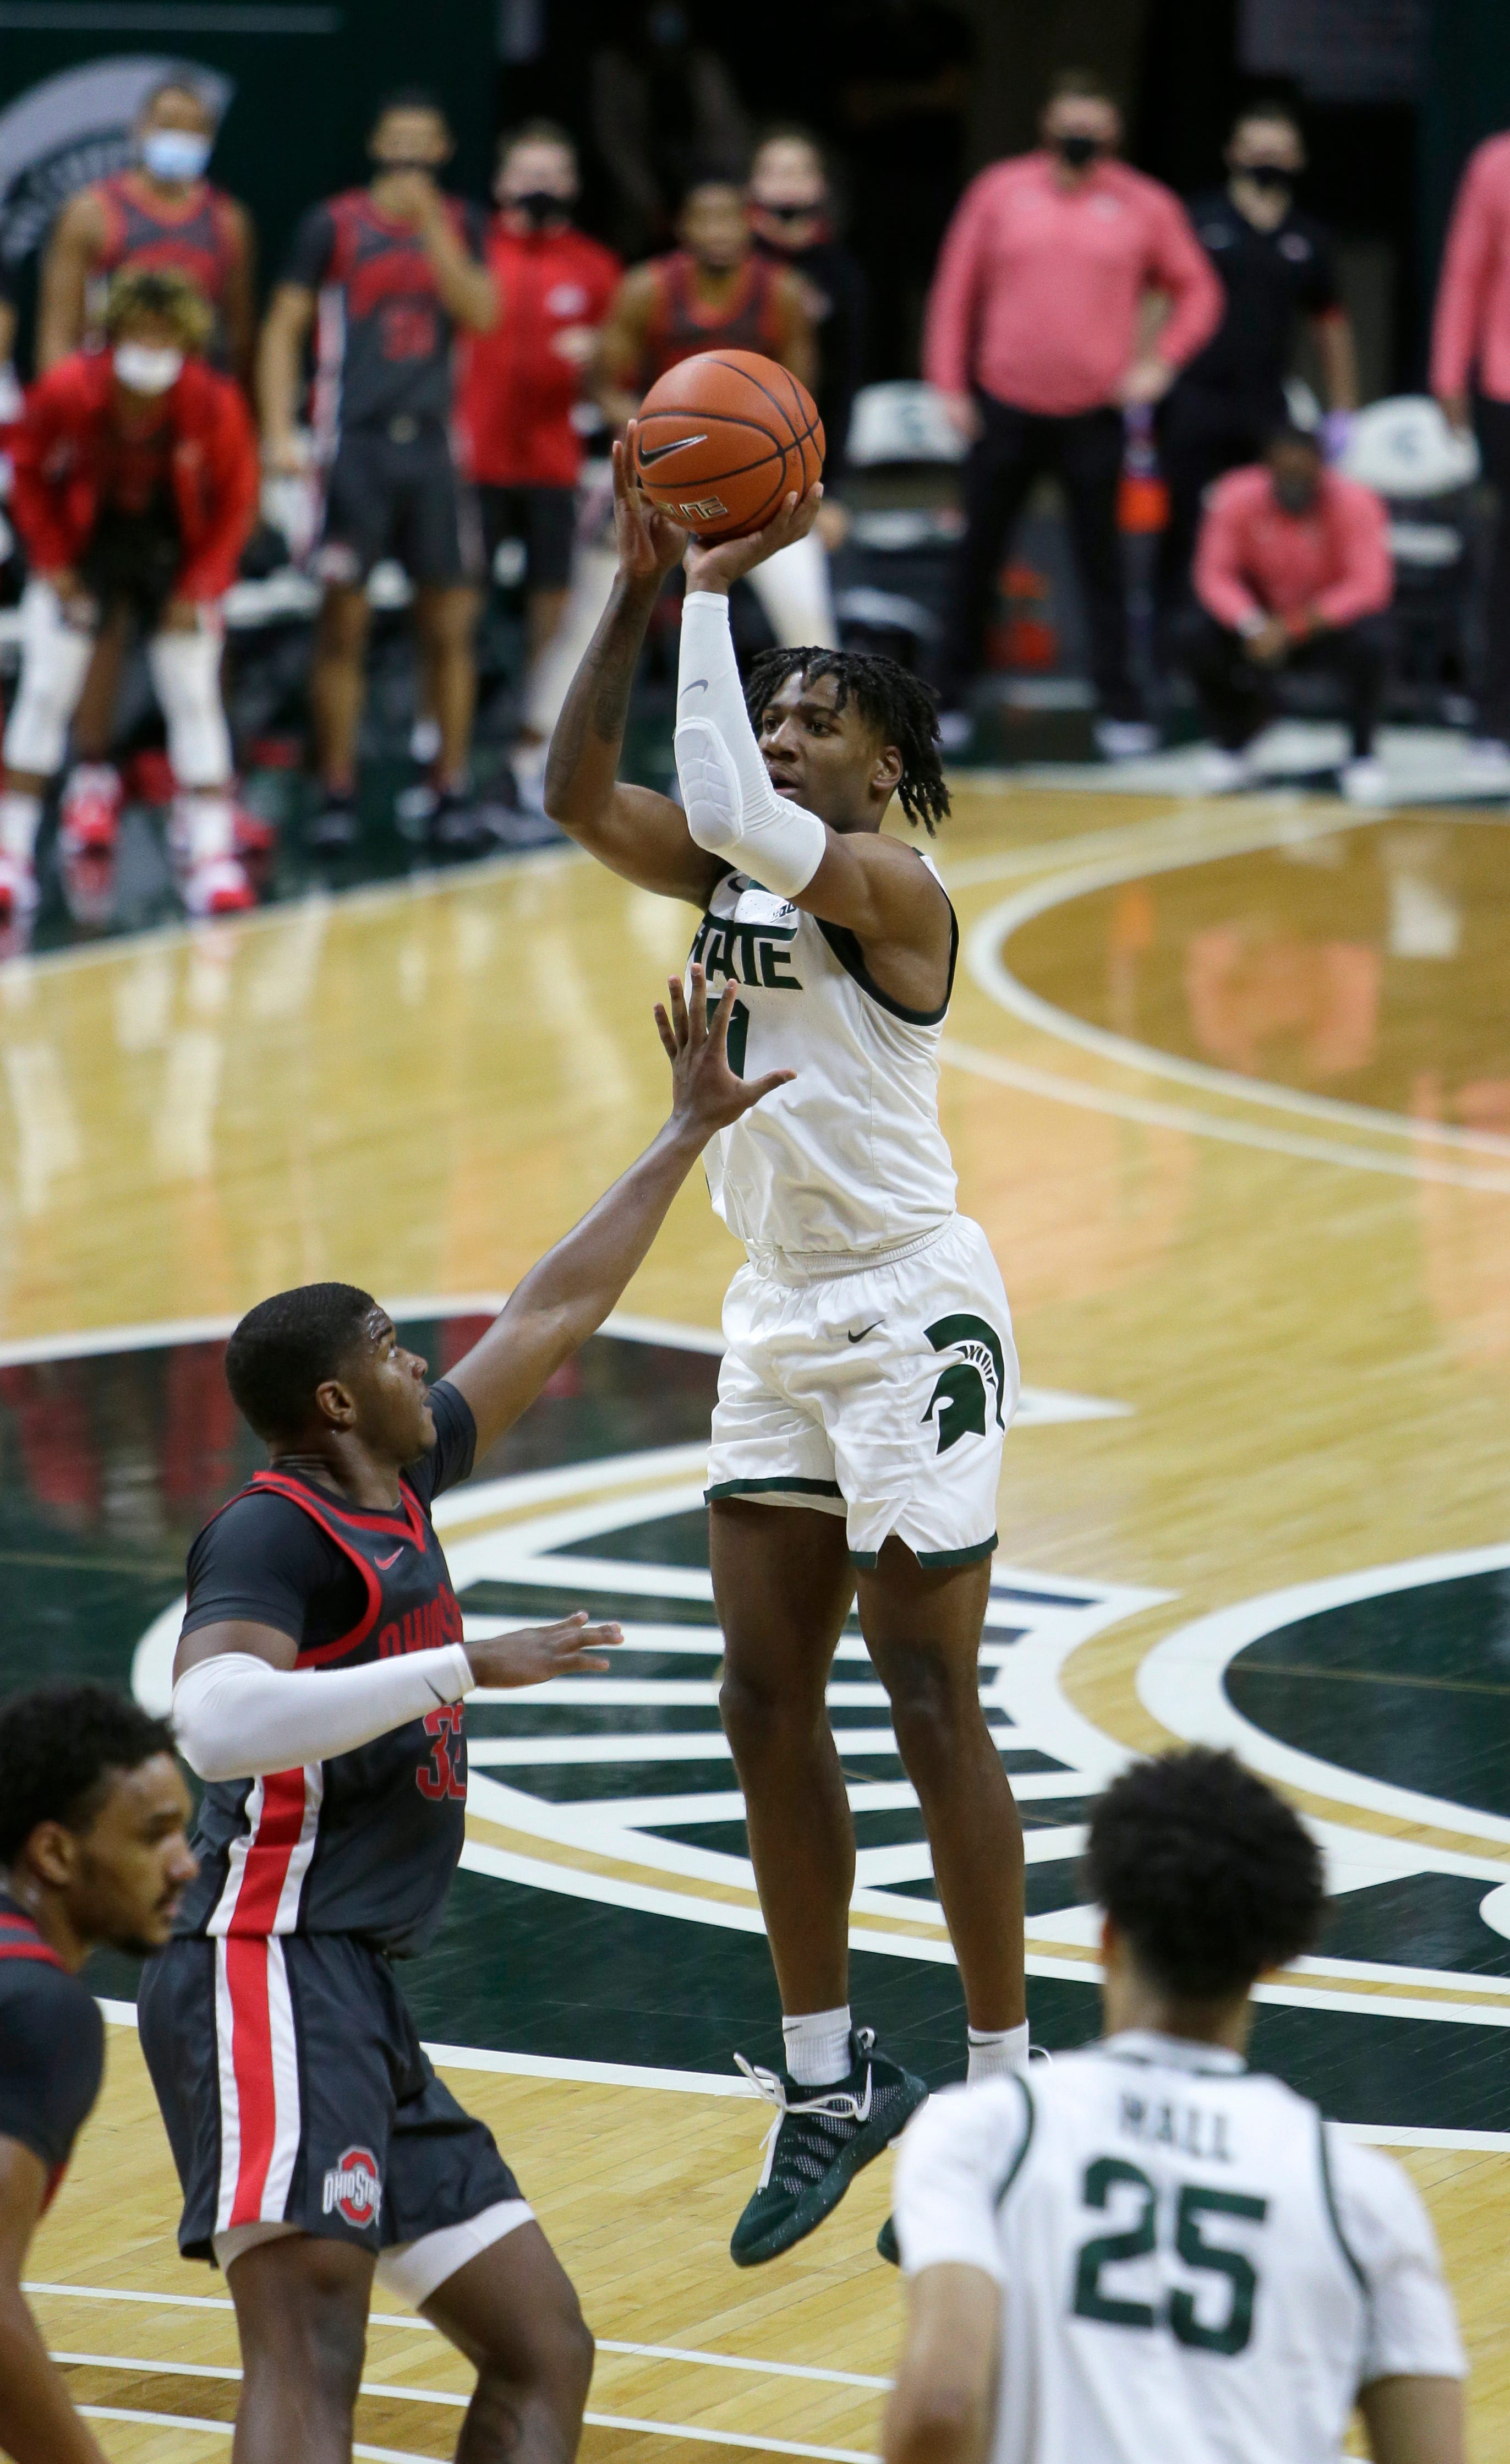 Michigan State forward Aaron Henry takes a shot against Ohio State forward E.J. Liddell (32) during the second half.